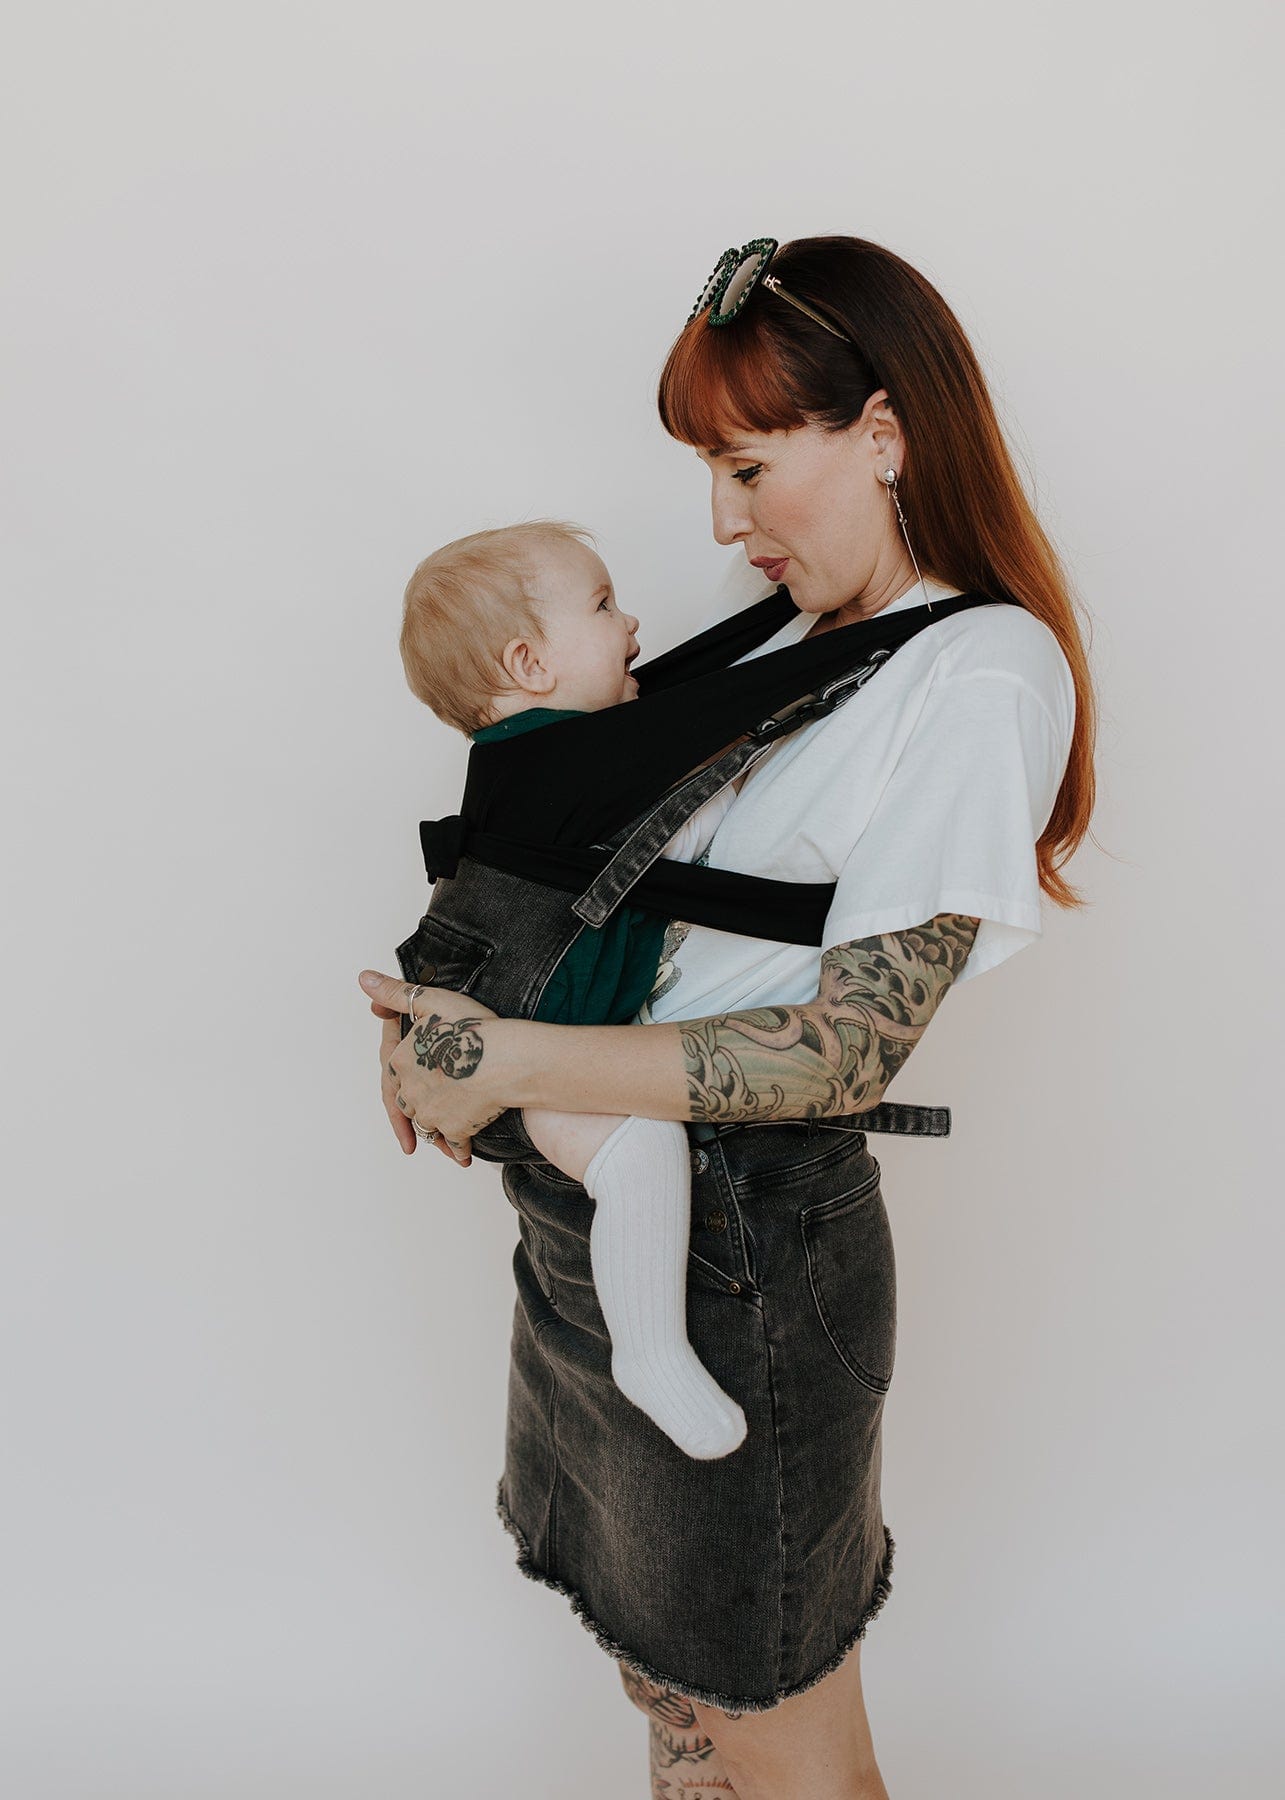 the night shift - the mumsie baby wearing overalls maternity baby carrier pregnancy